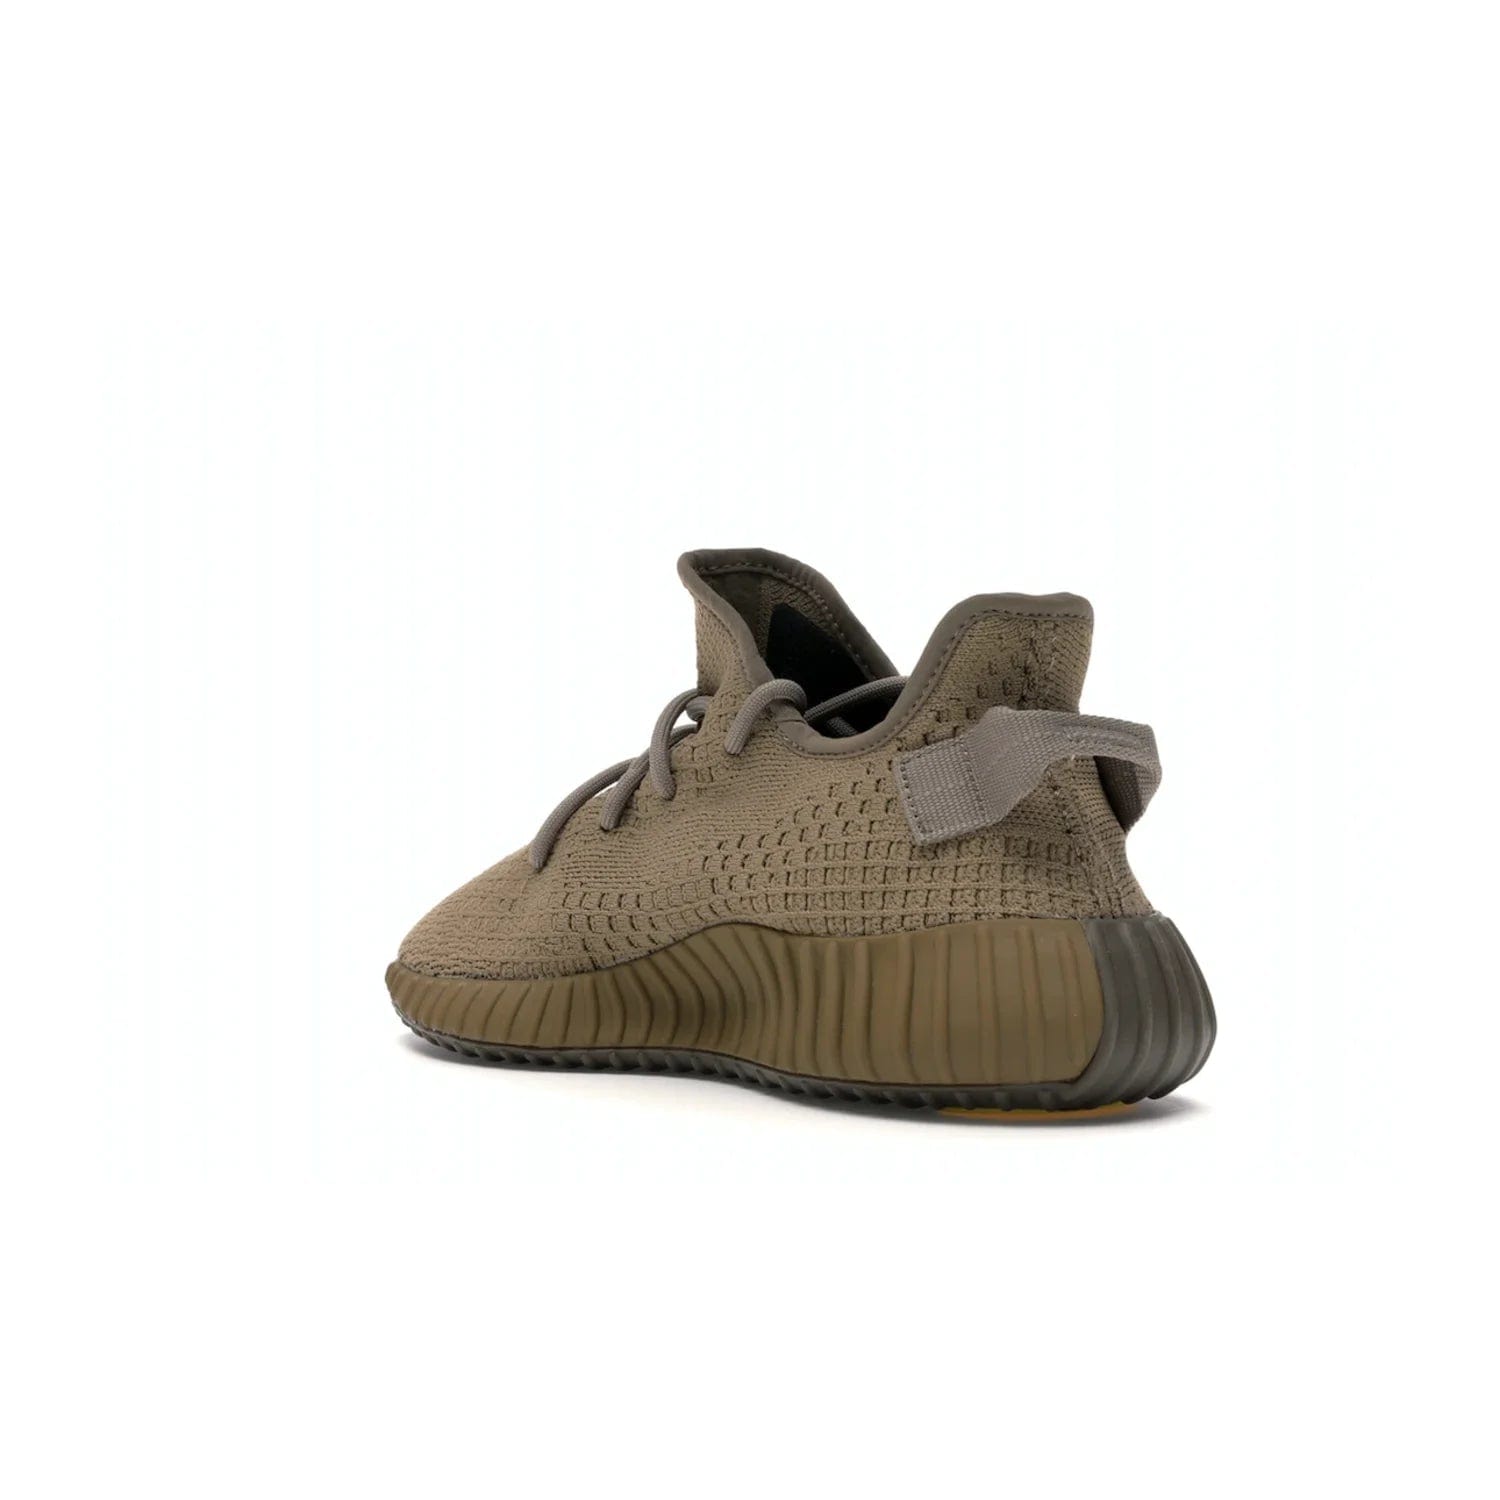 adidas Yeezy Boost 350 V2 Earth - Image 24 - Only at www.BallersClubKickz.com - Abstract style with the adidas Yeezy Boost 350 V2 Earth. Crafted with mud Primeknit upper, mud Boost and interior, and a translucent side stripe. Regional exclusive in Earth/Earth/Earth colorway, these fashionable sneakers released in February 2020. Showcase your style with the Yeezy 350 V2 Earth.